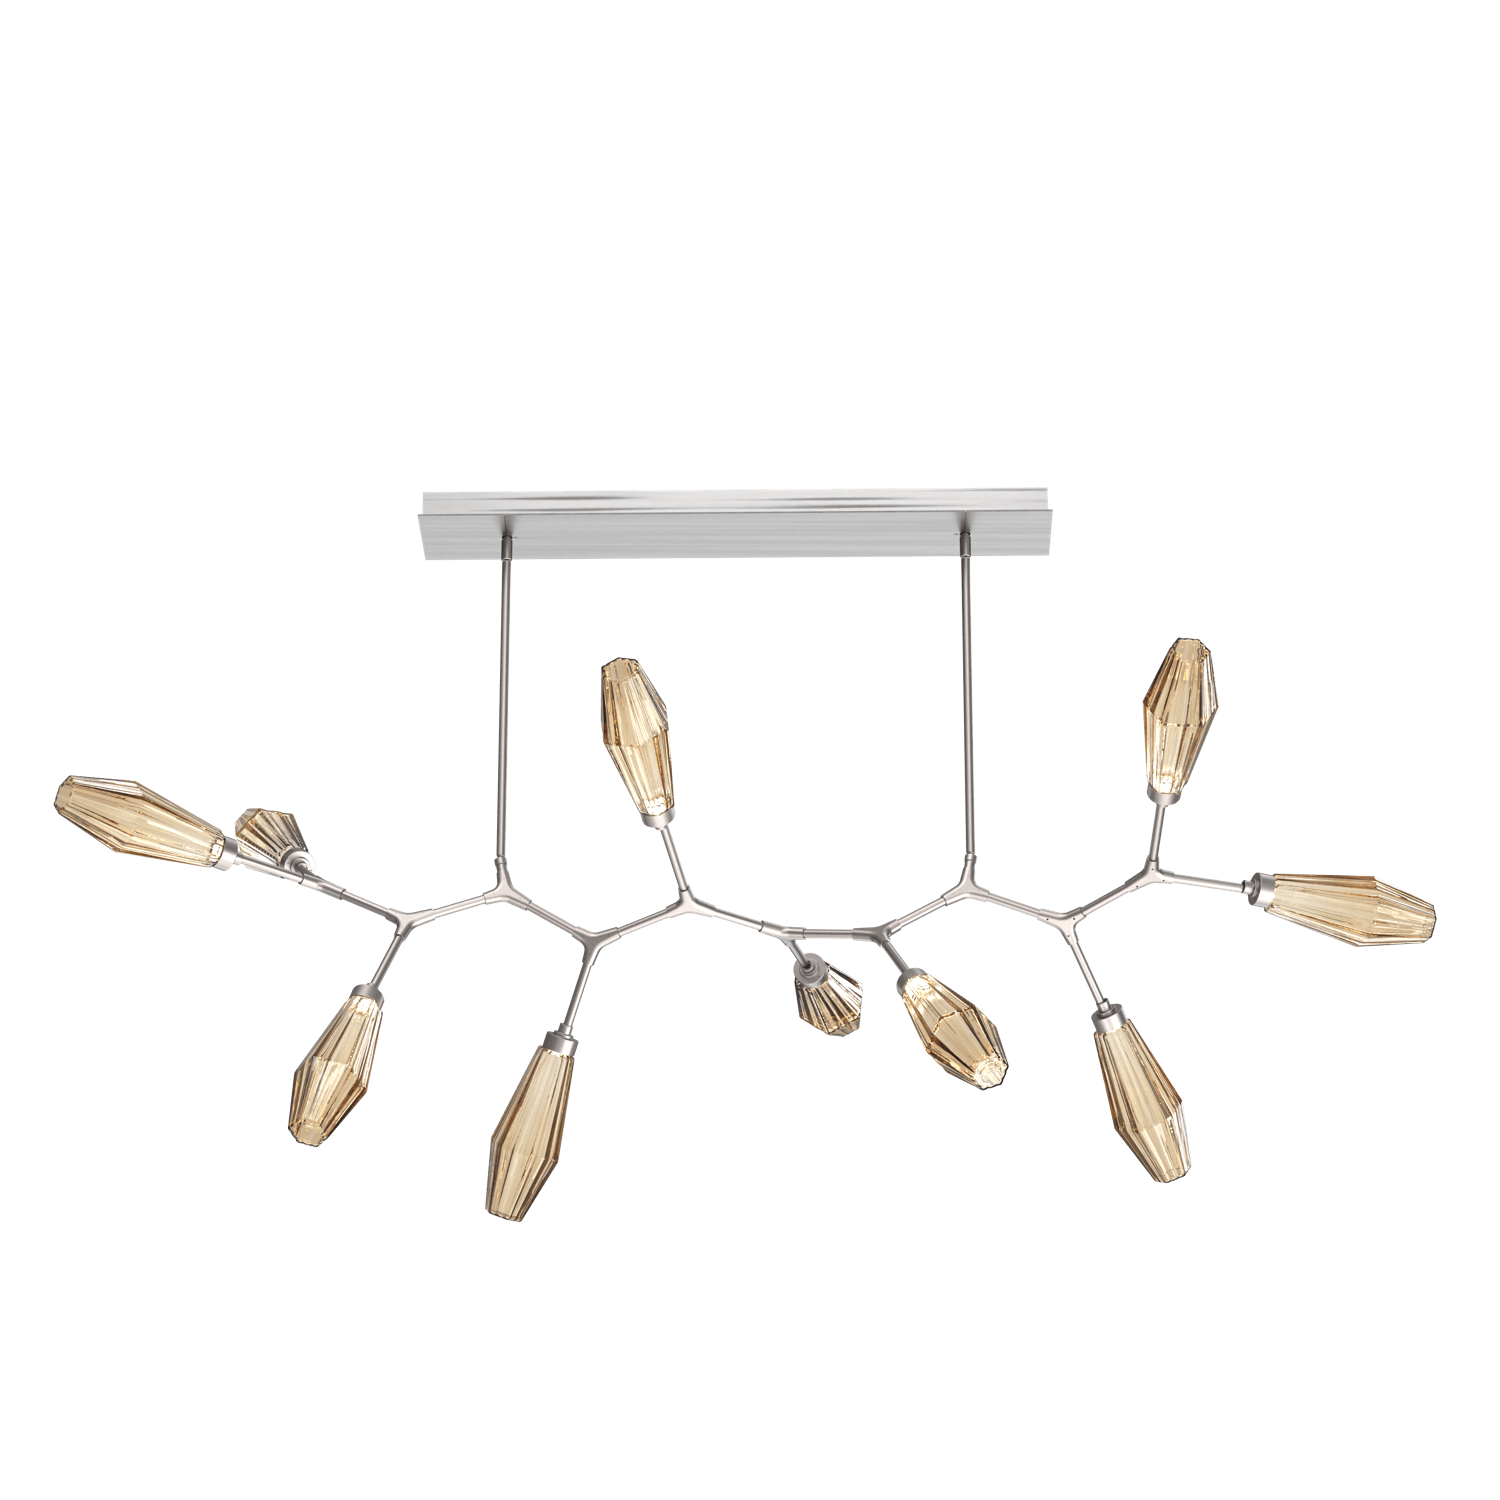 PLB0049-BC-SN-RB-Hammerton-Studio-Aalto-10-light-modern-branch-chandelier-with-satin-nickel-finish-and-optic-ribbed-bronze-glass-shades-and-LED-lamping